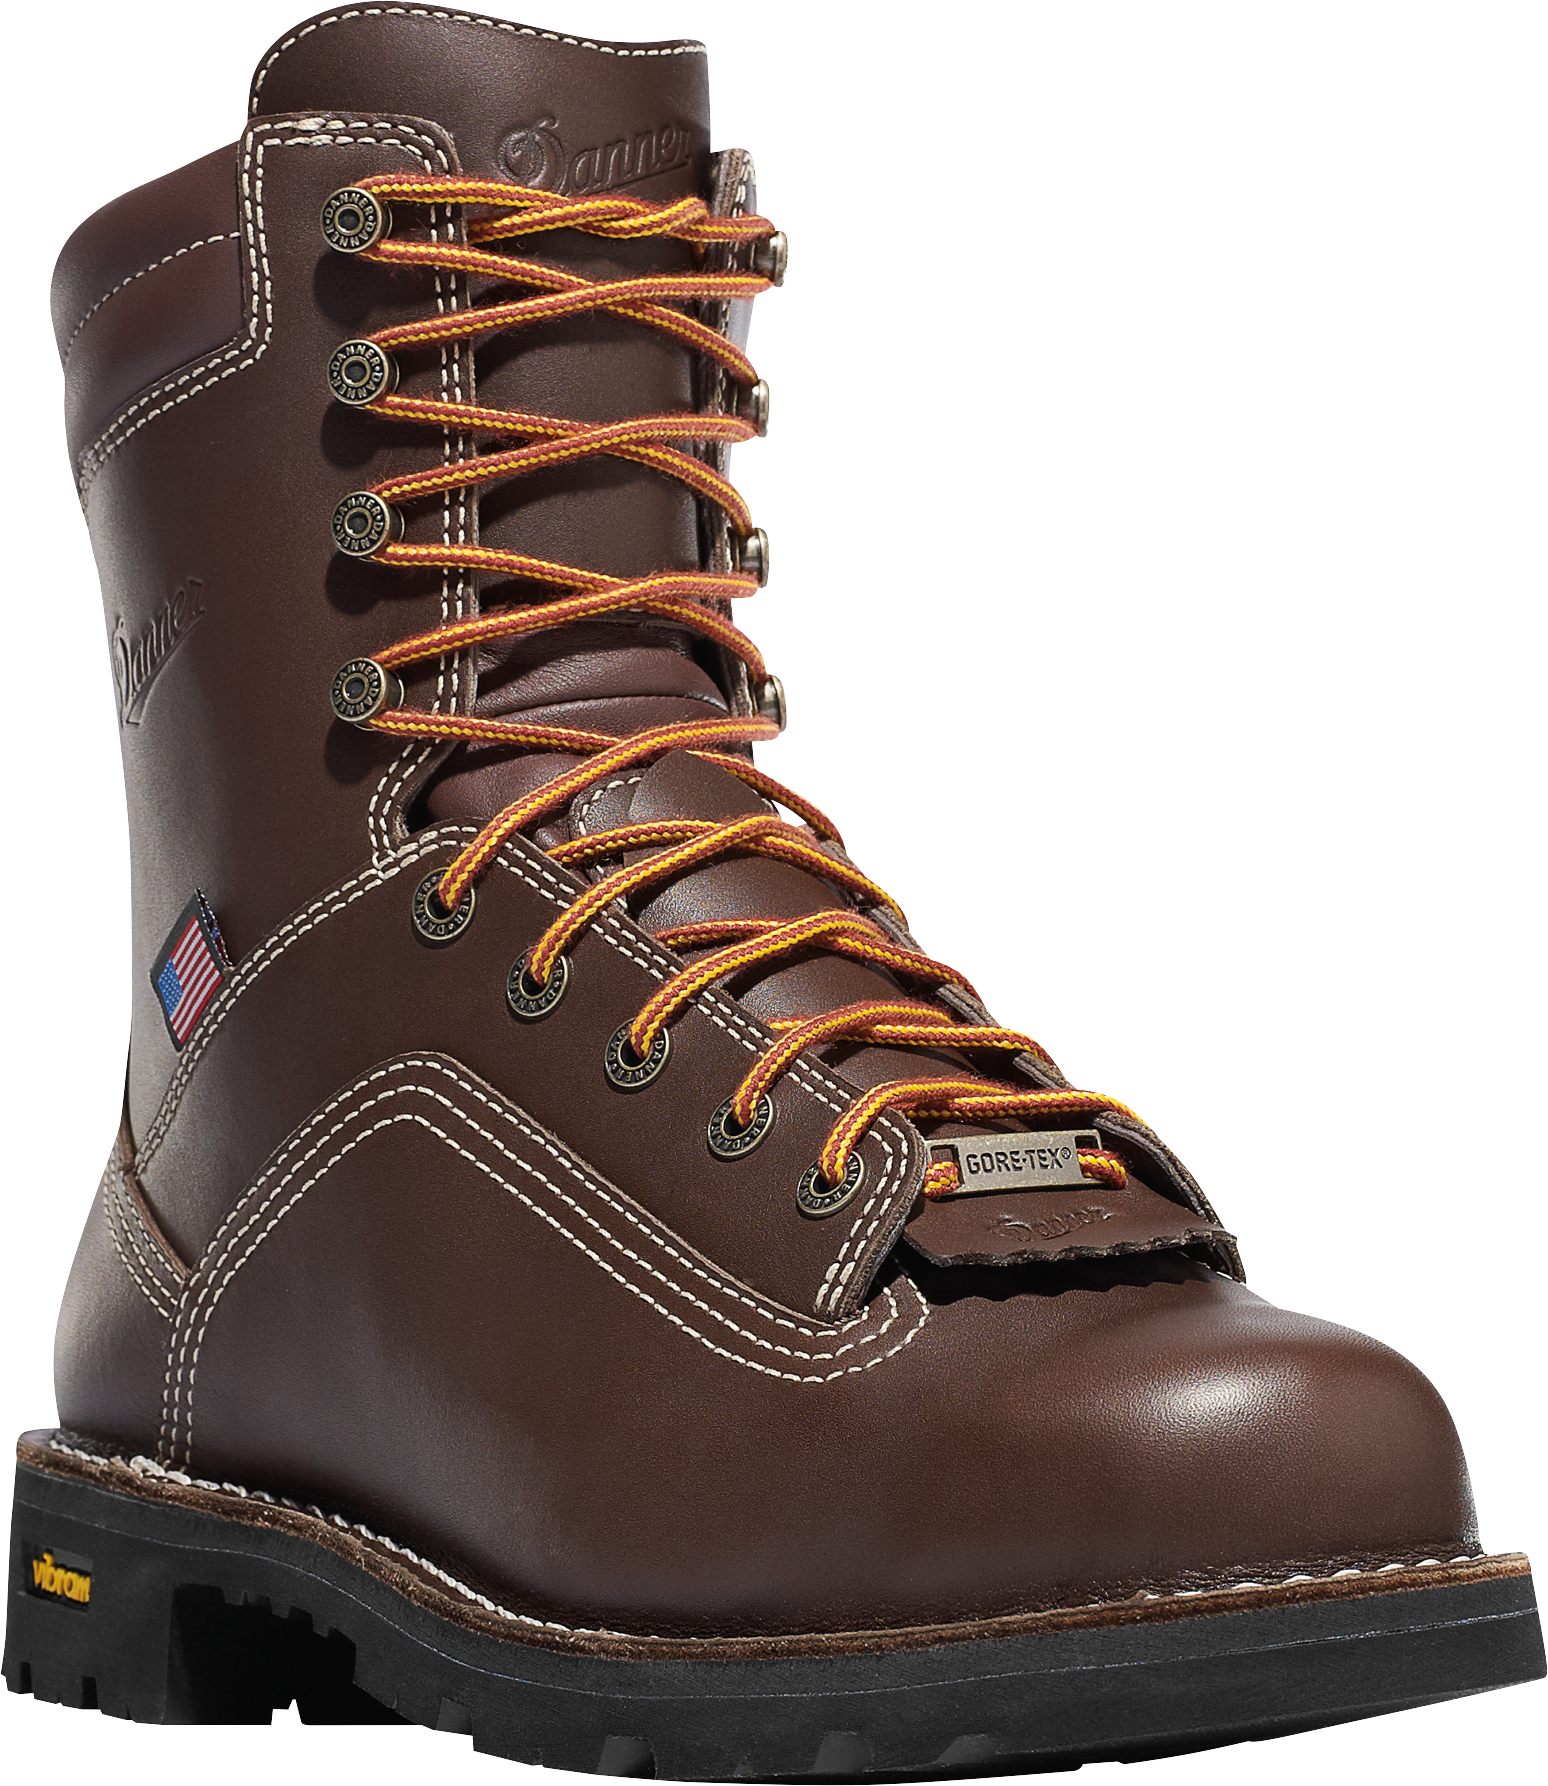 Danner Quarry USA GORE-TEX Work Boots for Men - Brown - 7.5M